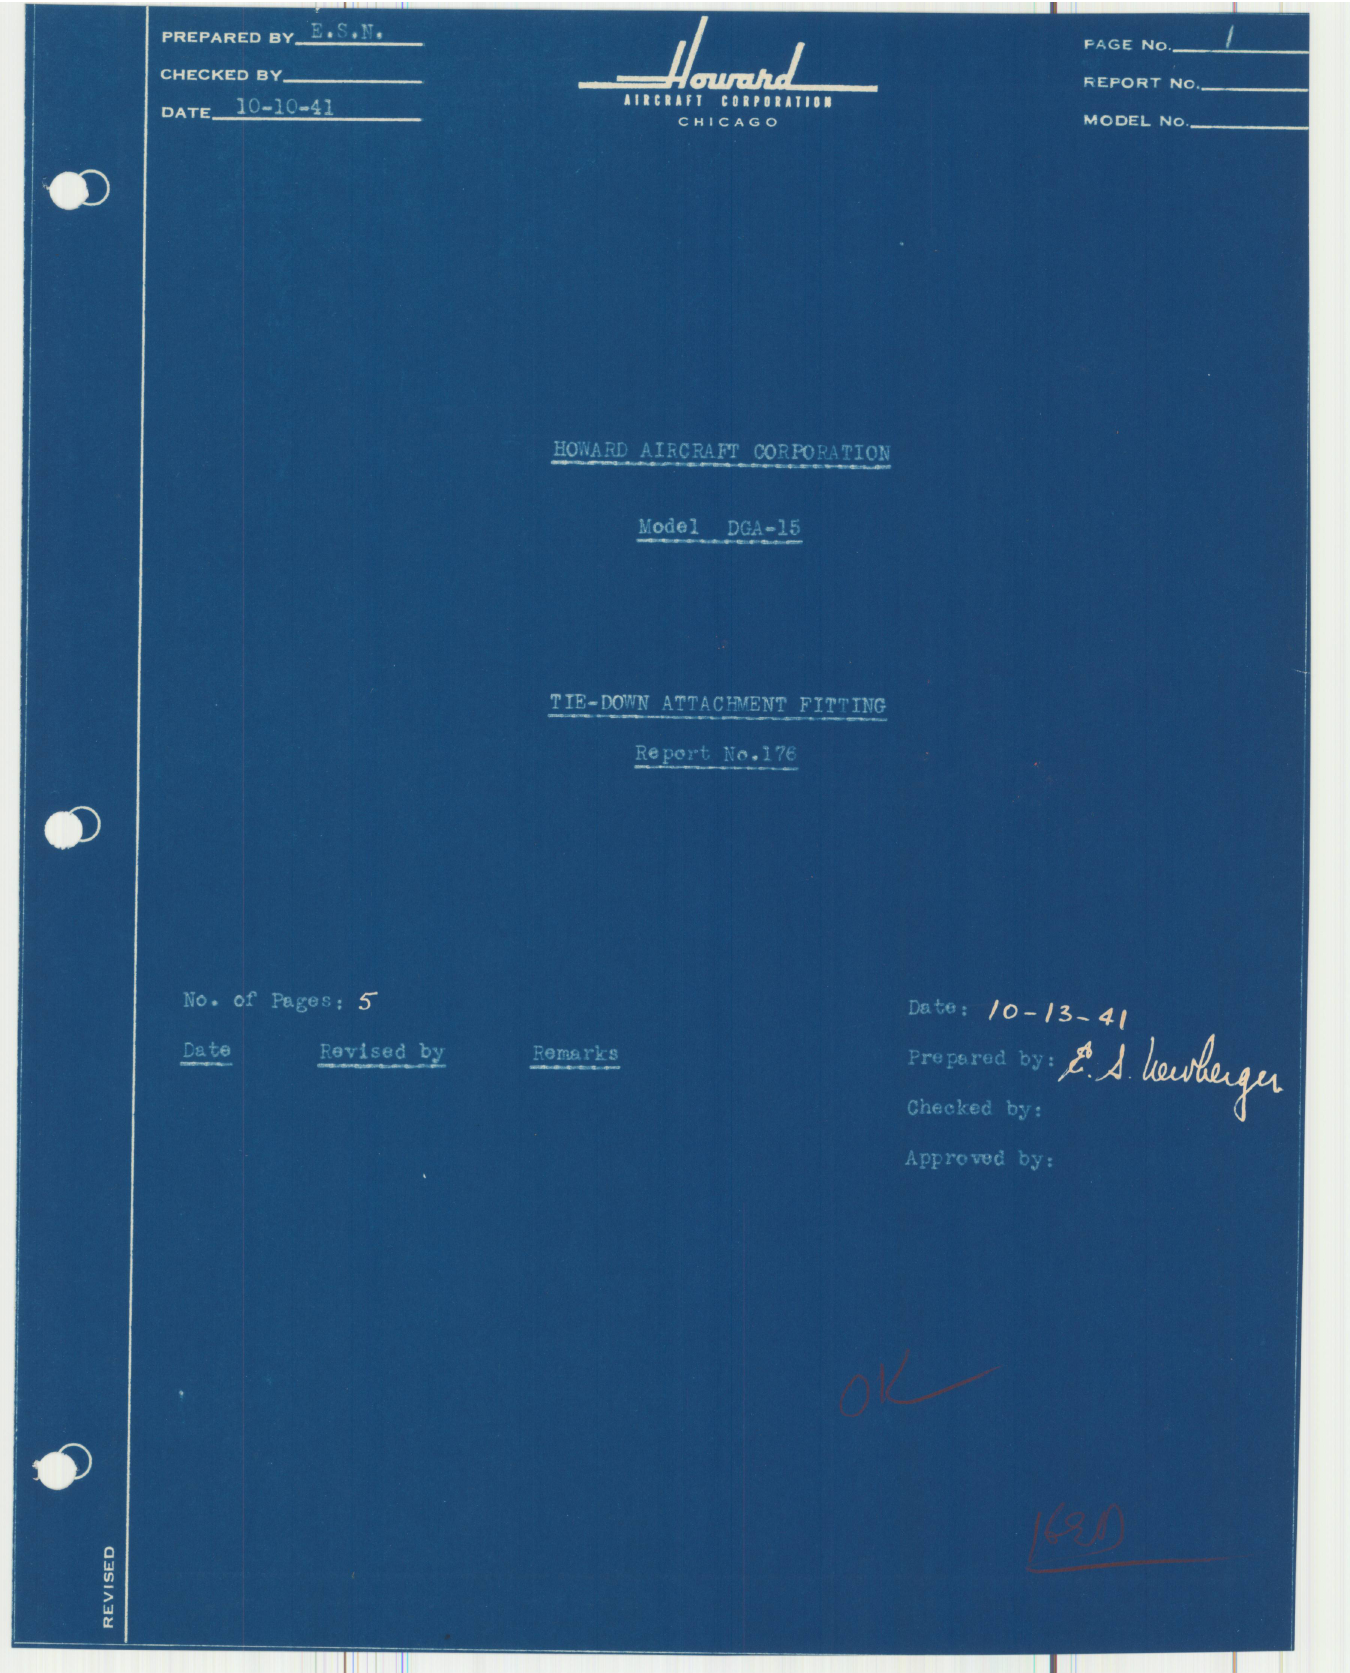 Sample page 2 from AirCorps Library document: Report 176, Tie-Down Attachment Fitting, DGA-15